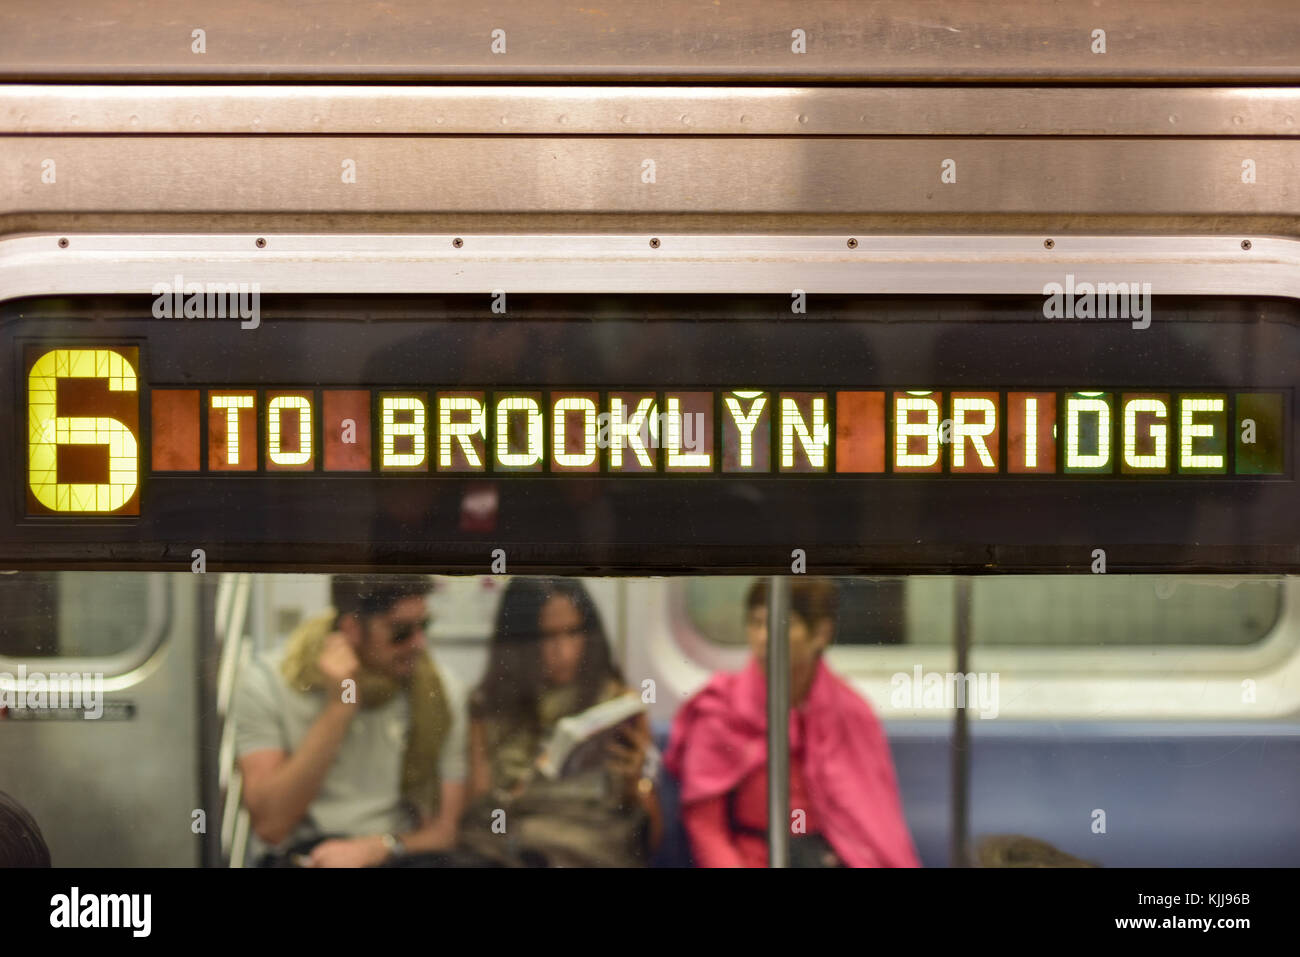 New York, USA - May 31, 2015: The 6 Train on the way to Brooklyn Bridge Station in the New York Subway. Stock Photo